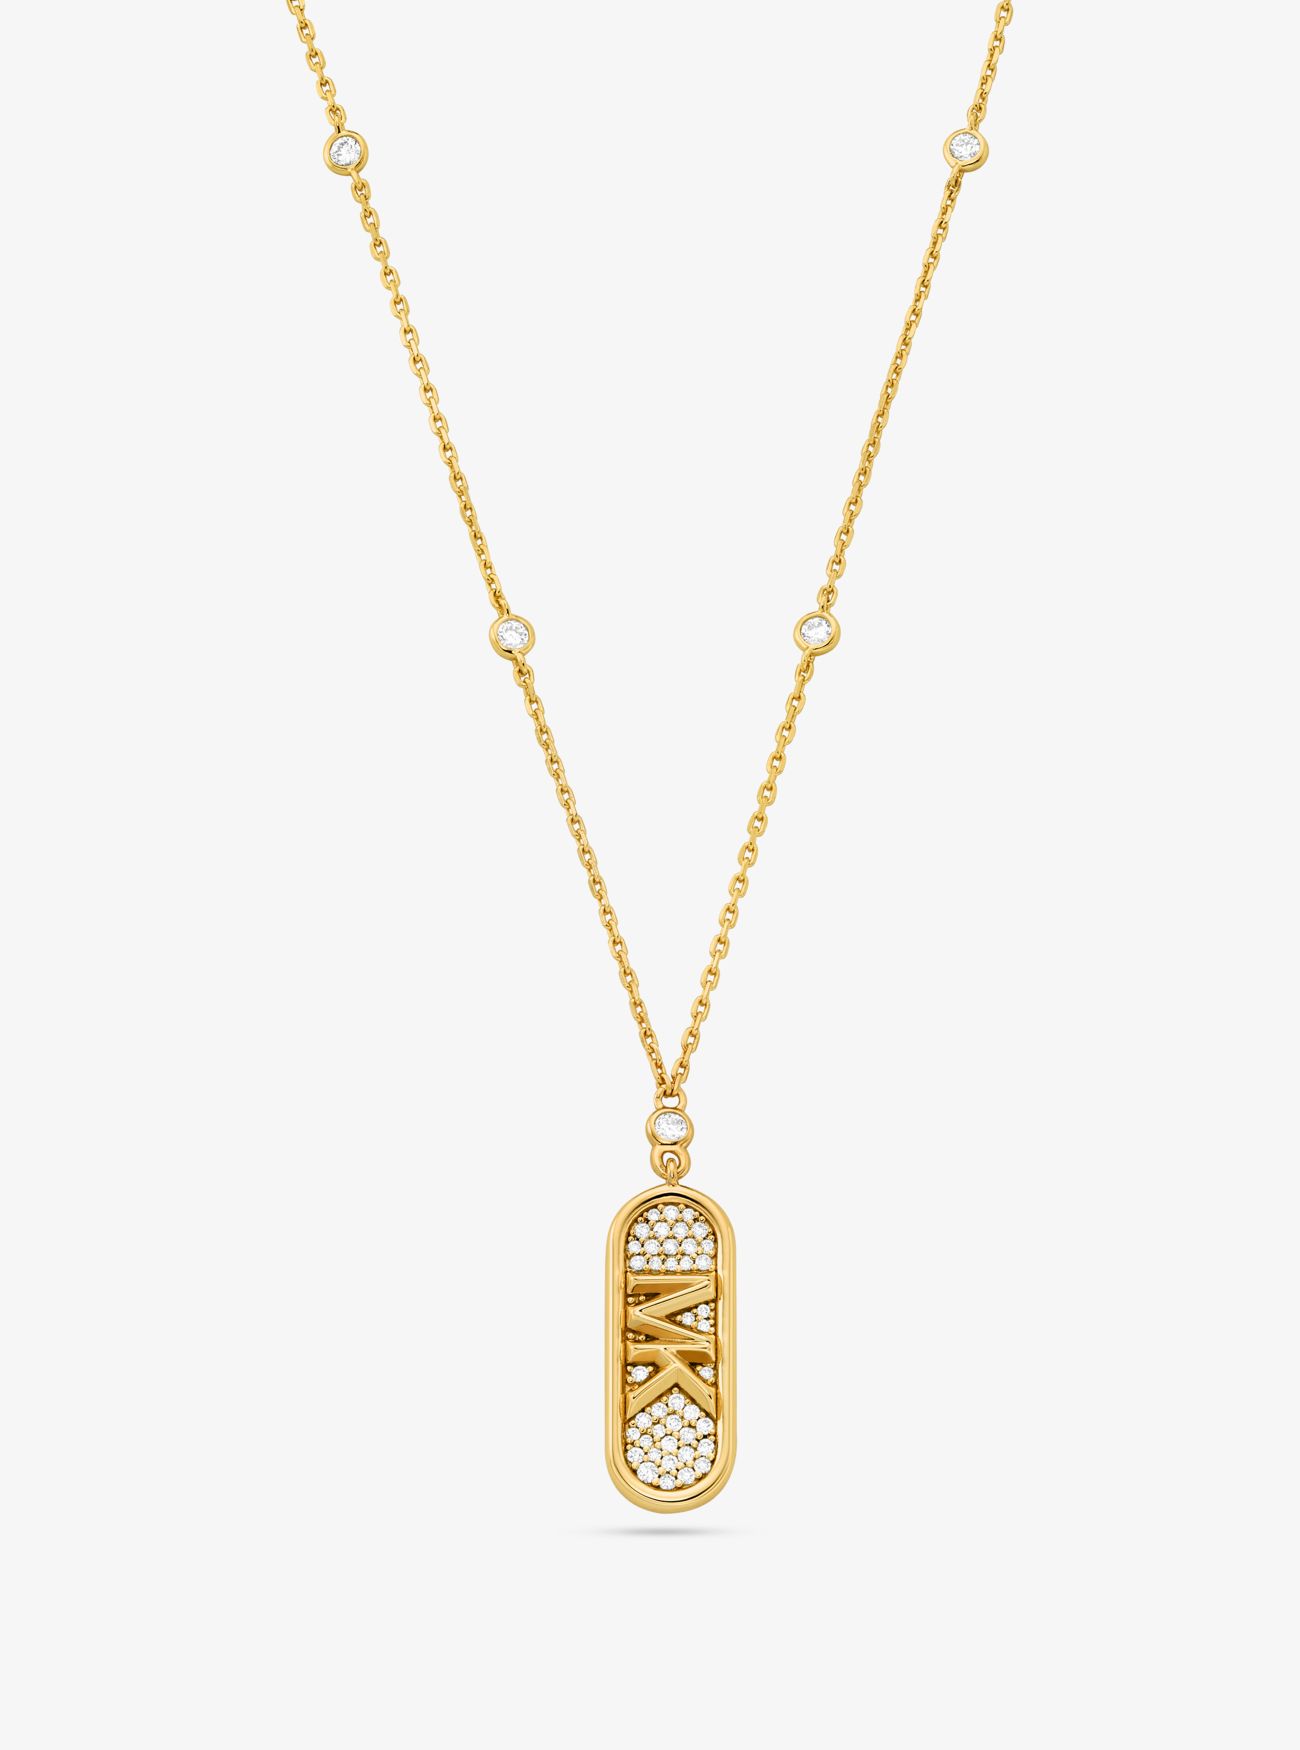 MK Pavé Precious Metal-Plated and Sterling Silver Empire Logo Necklace - Gold - Michael Kors